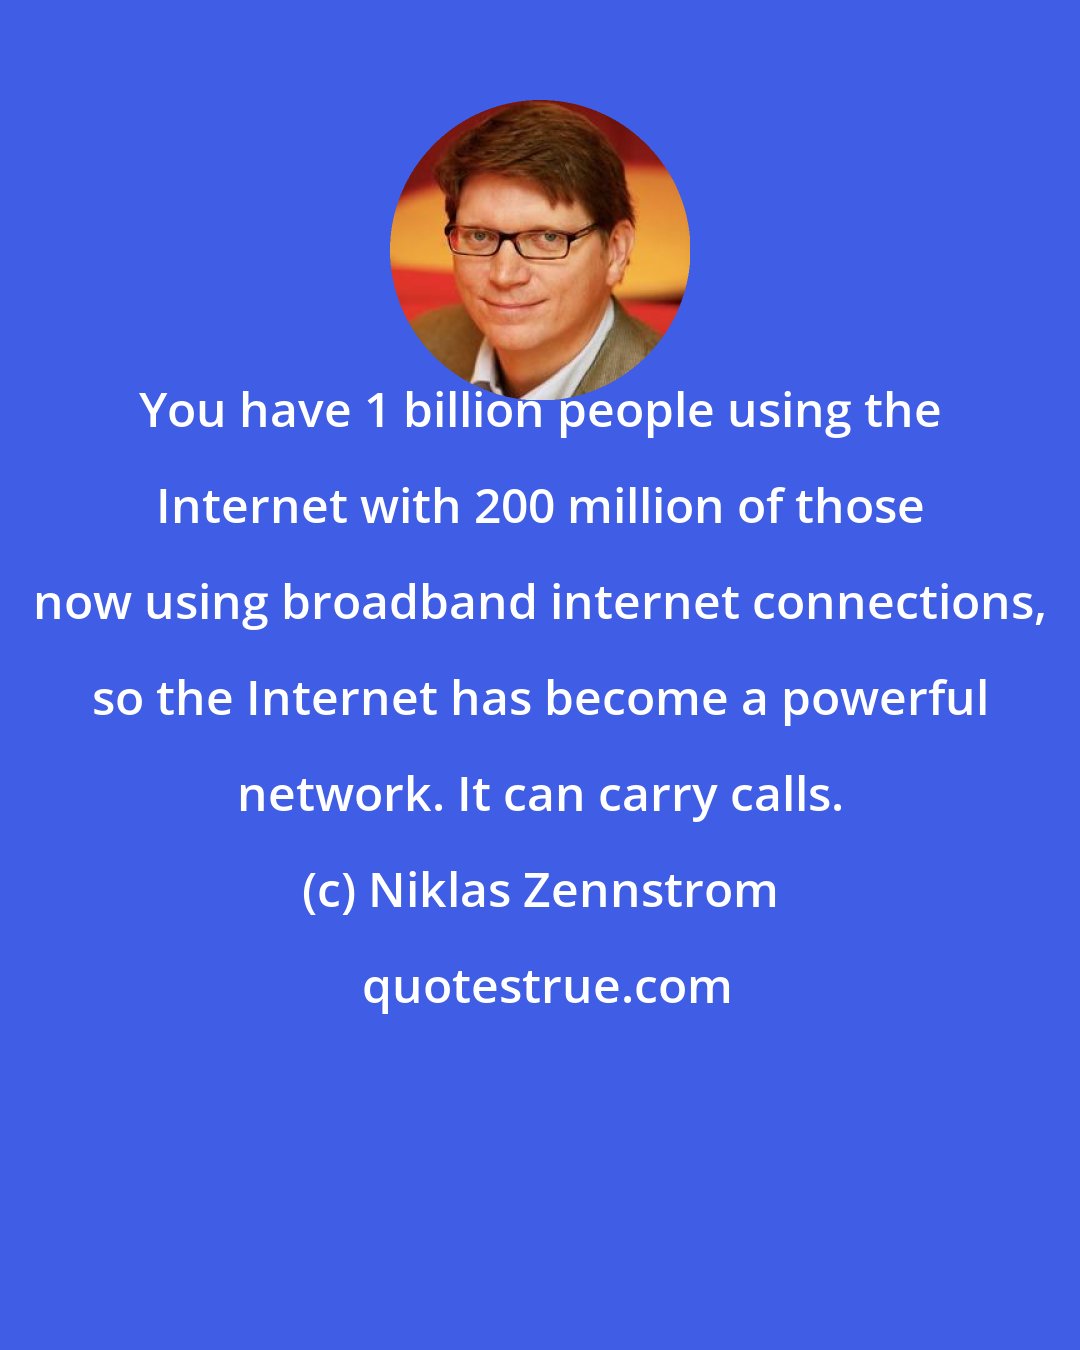 Niklas Zennstrom: You have 1 billion people using the Internet with 200 million of those now using broadband internet connections, so the Internet has become a powerful network. It can carry calls.